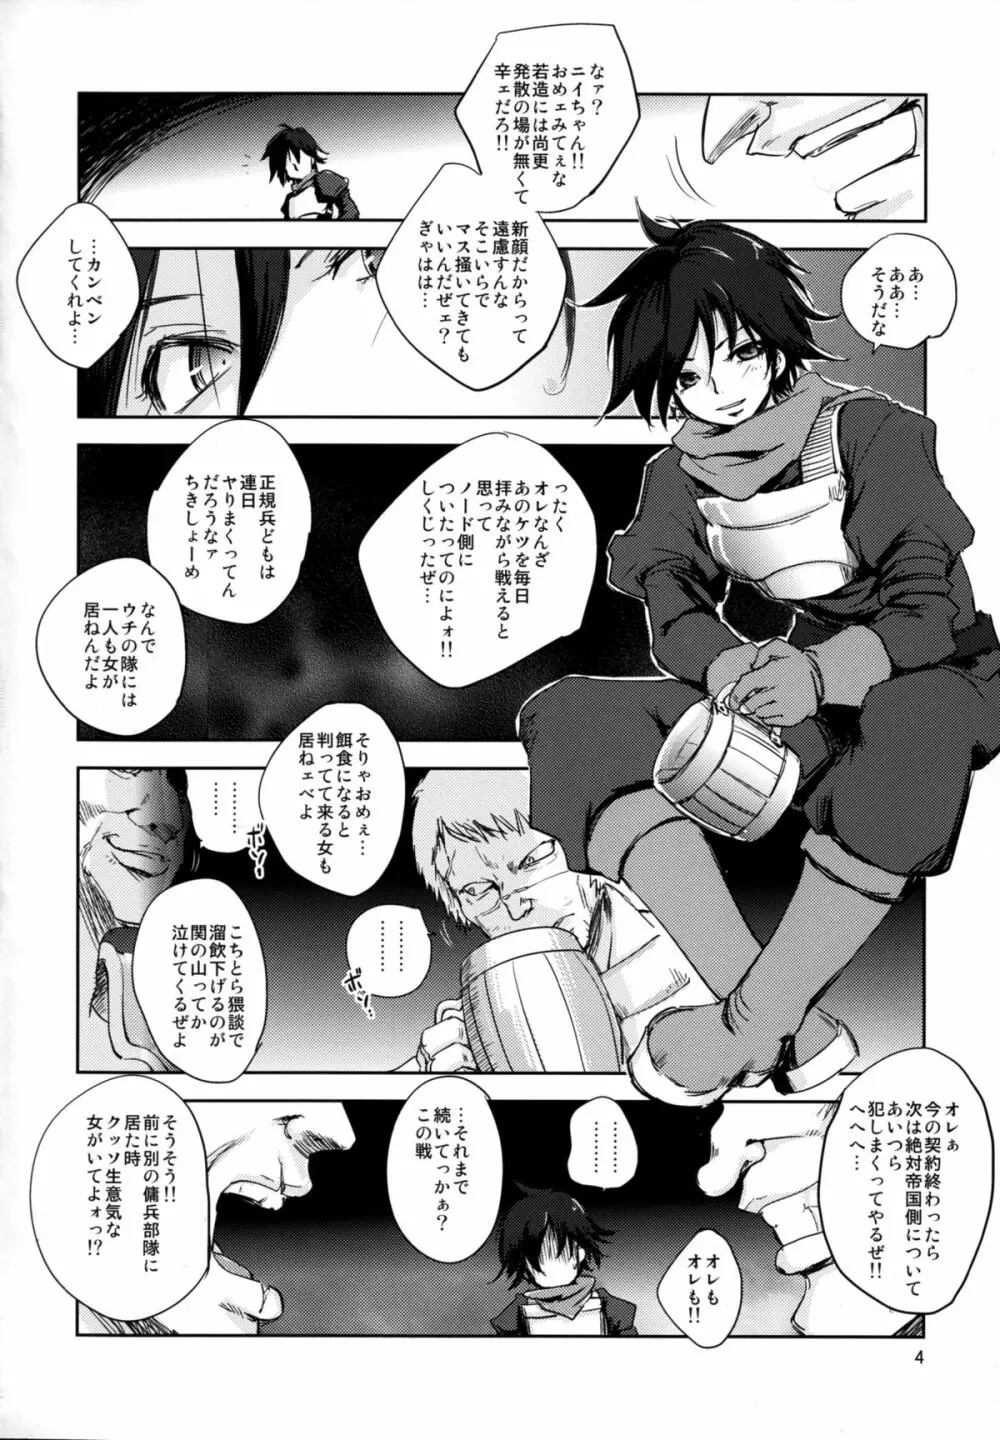 GRASSEN'S WAR ANOTHER STORY Ex #05 ノード侵攻 V Page.4